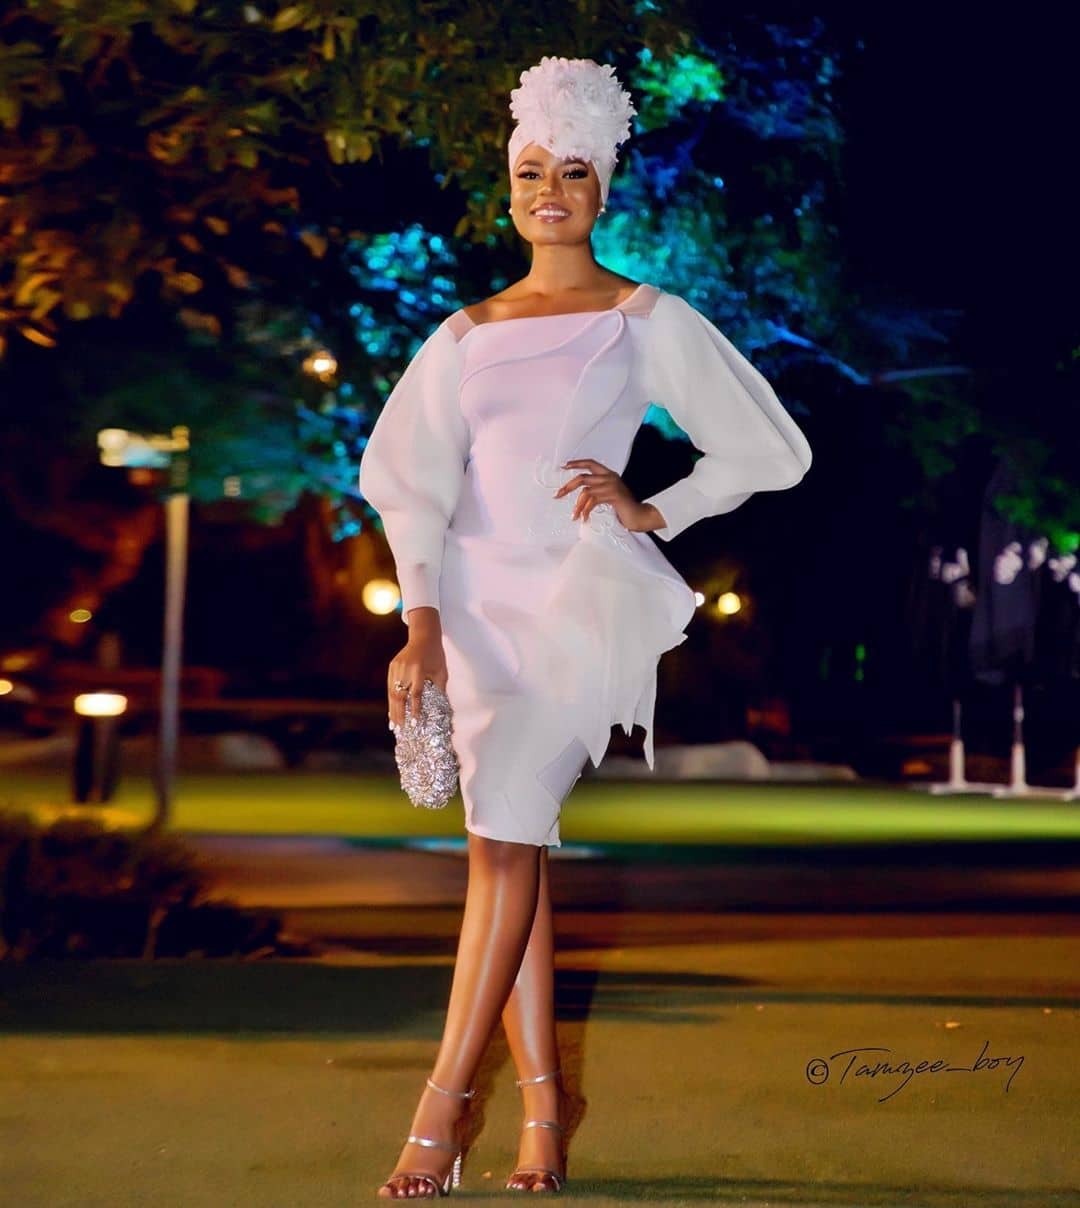 nancy-isime-white-outfit-heres-how-nigerian-celebrities-want-you-to-dress-as-the-ideal-wedding-guest-with-style-for-weddings-this-december